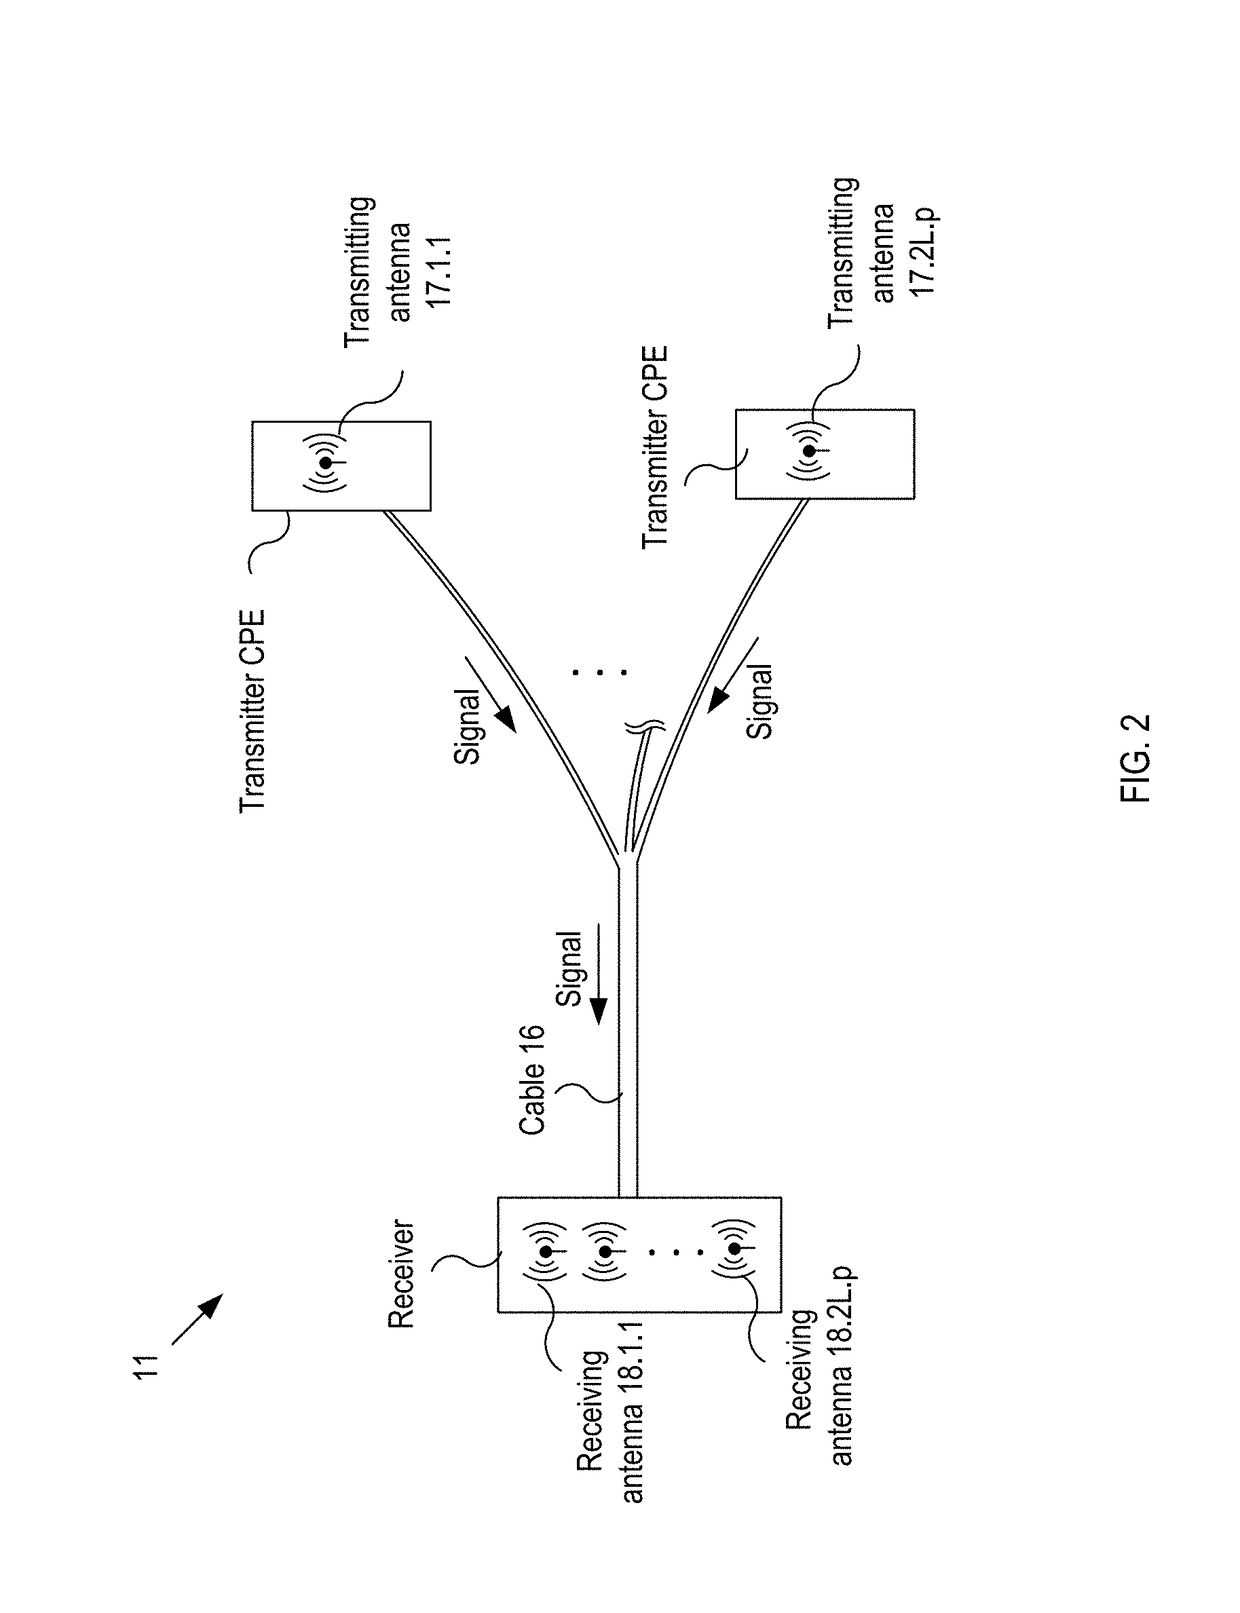 Systems and methods for implementing high-speed waveguide transmission over wires